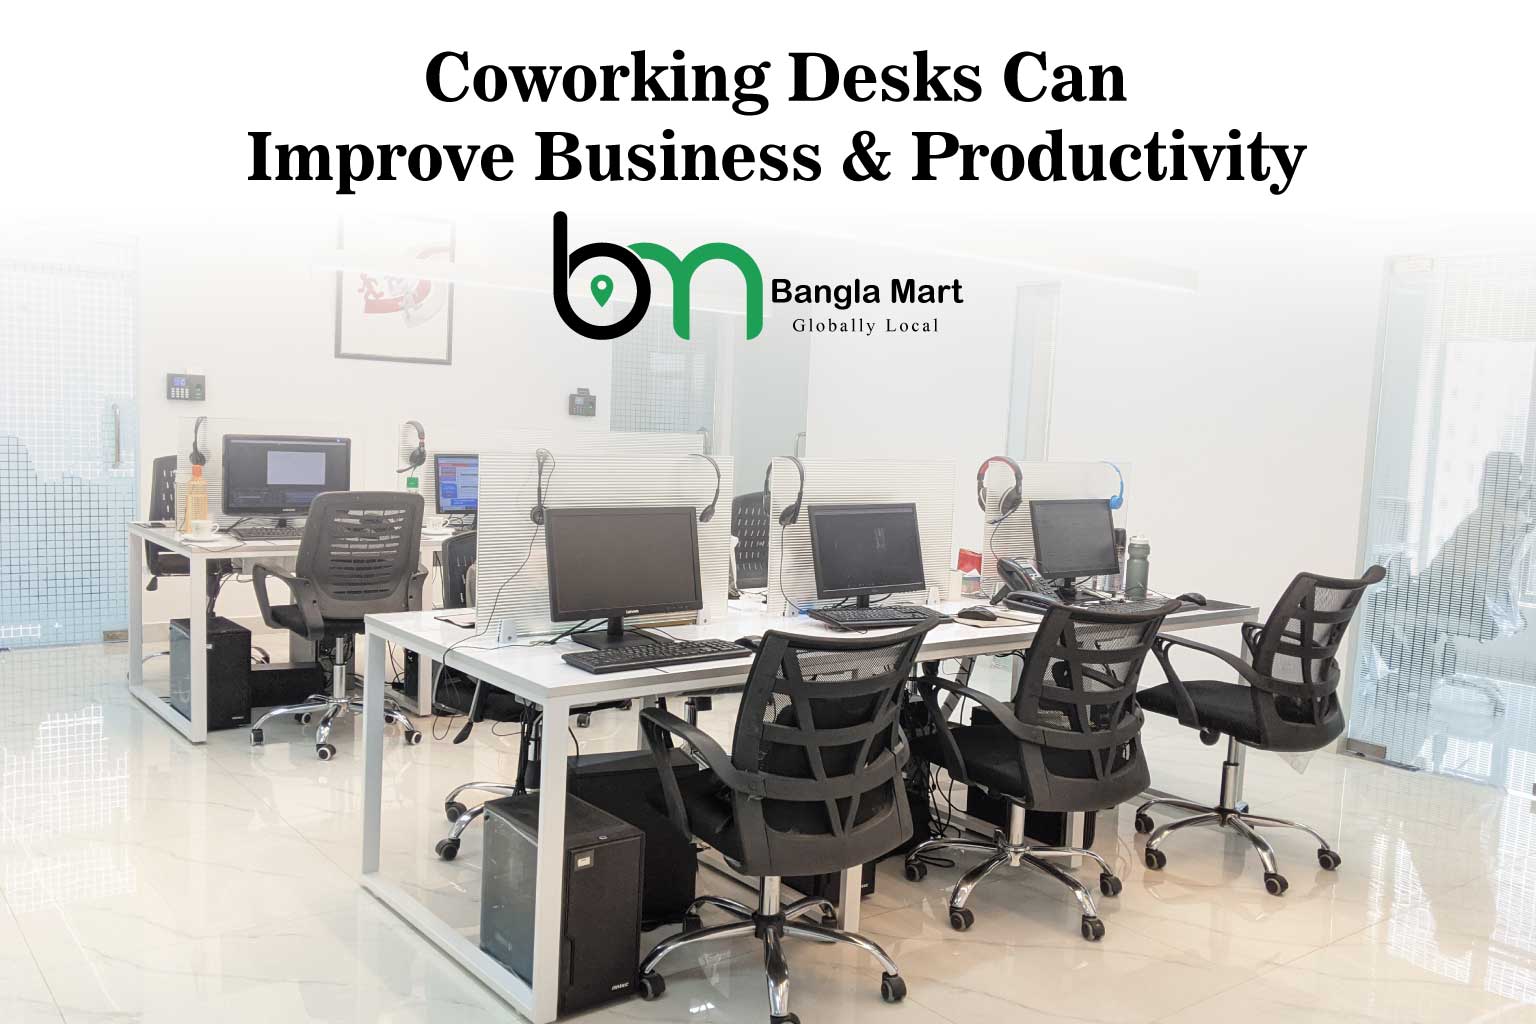 Coworking Desks Can Improve Business